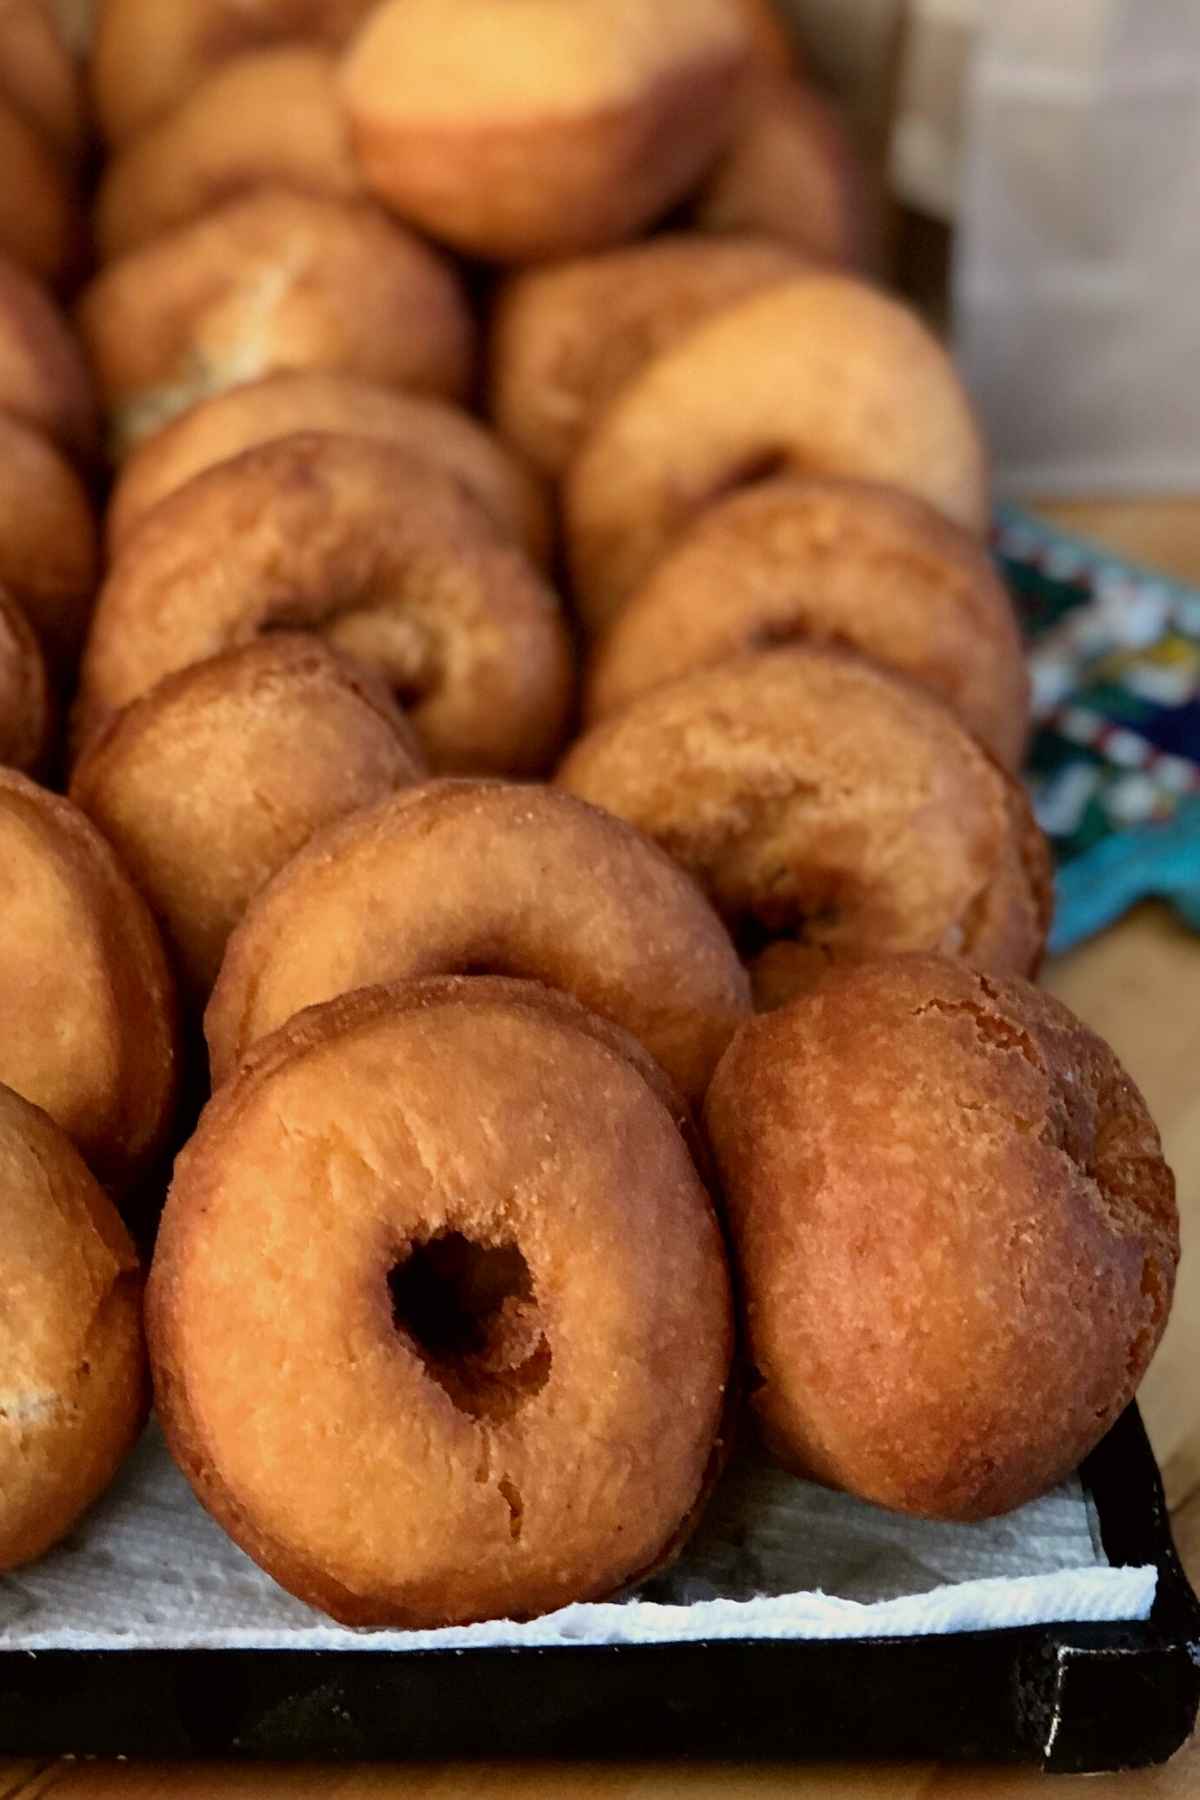 A tray full of homemade buttermilk doughnuts on paper towel lined baking sheet.